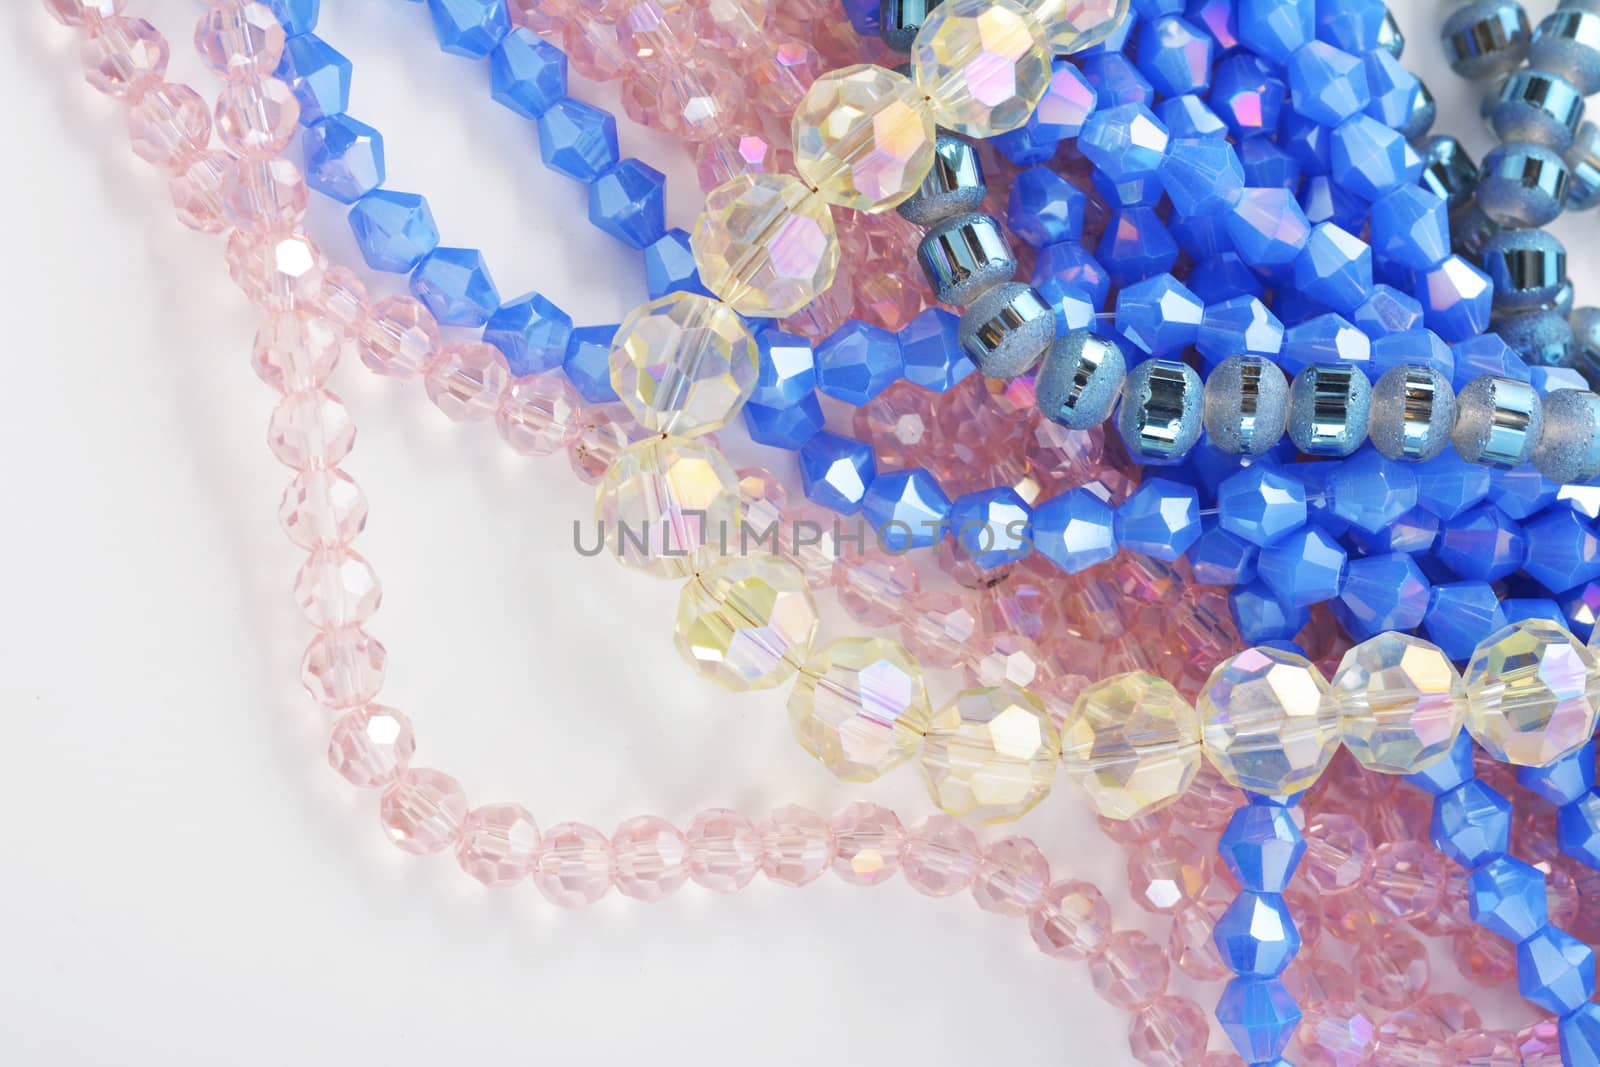 Mix of color faceted glass sparkle beads. Materials for creative work on white background.